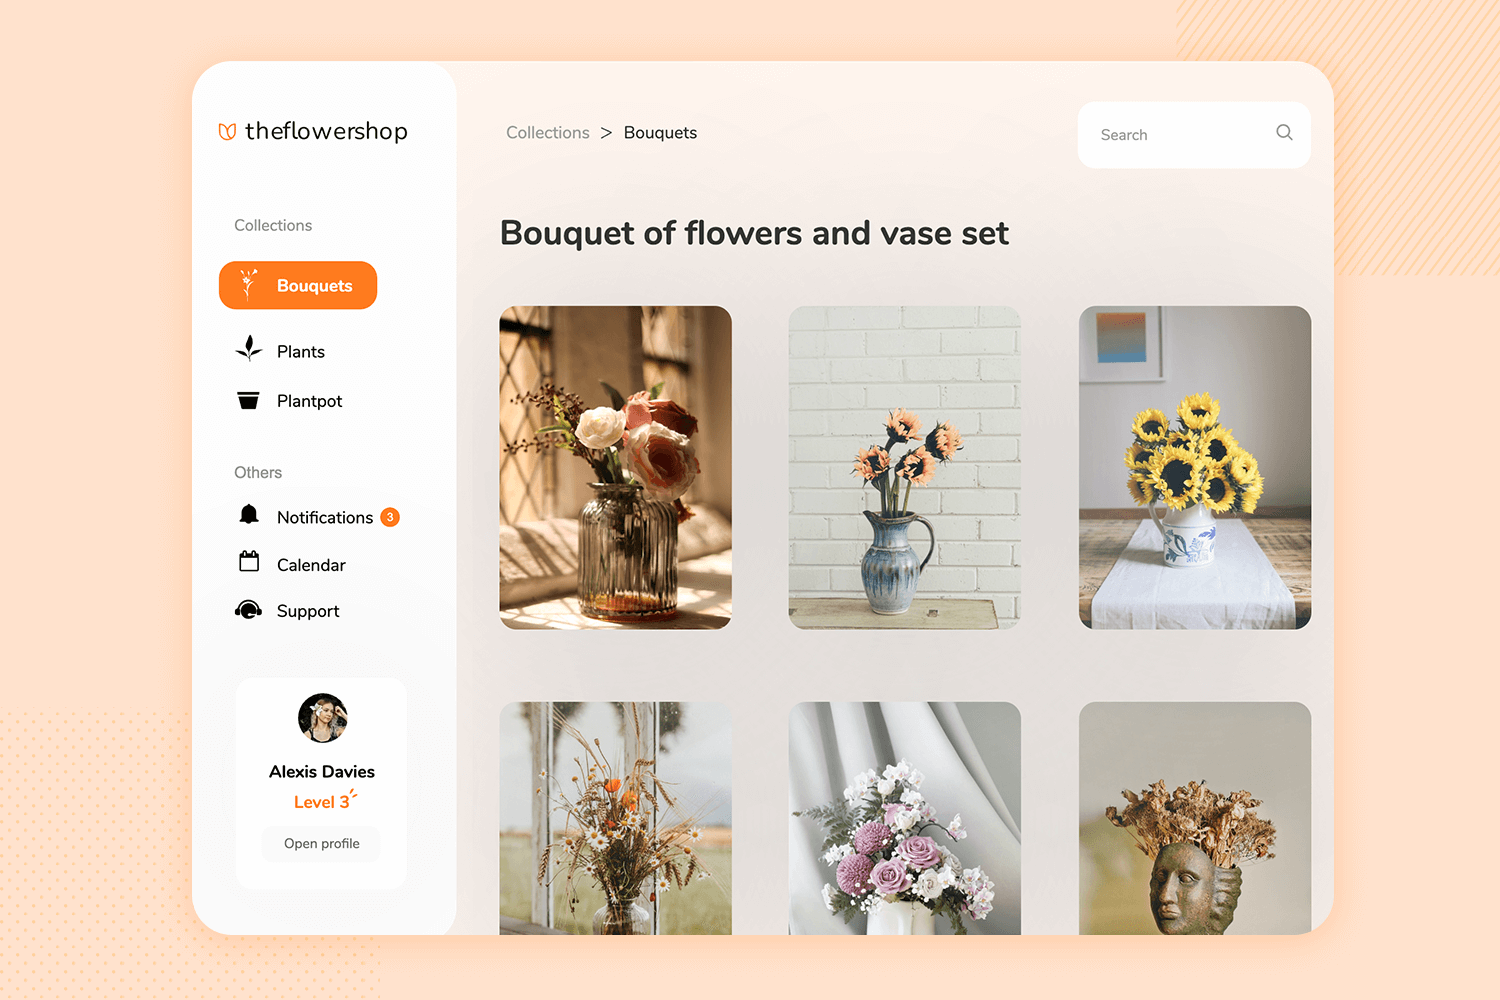 Mockup of an online flower shop app featuring a bouquet collection with images of various flower arrangements and a user profile section